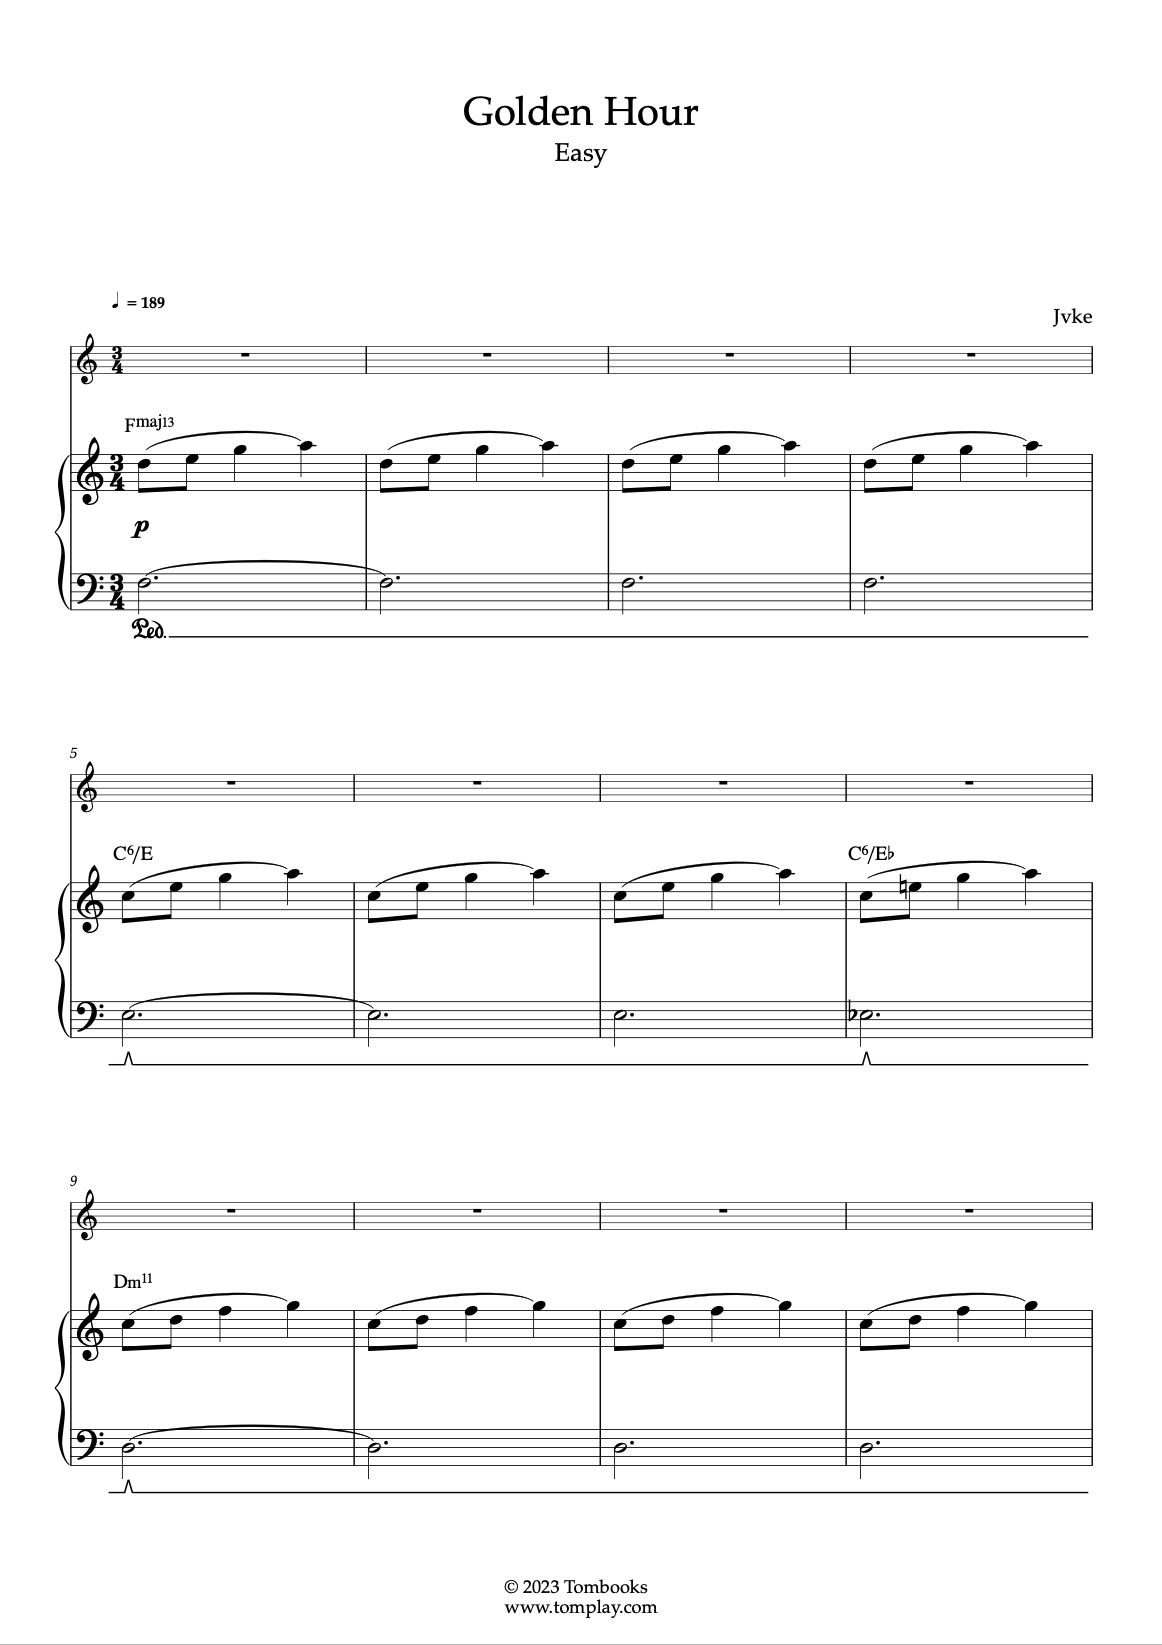 Golden Hour (Easy Level, with Orchestra) (Jvke) - Piano Sheet Music